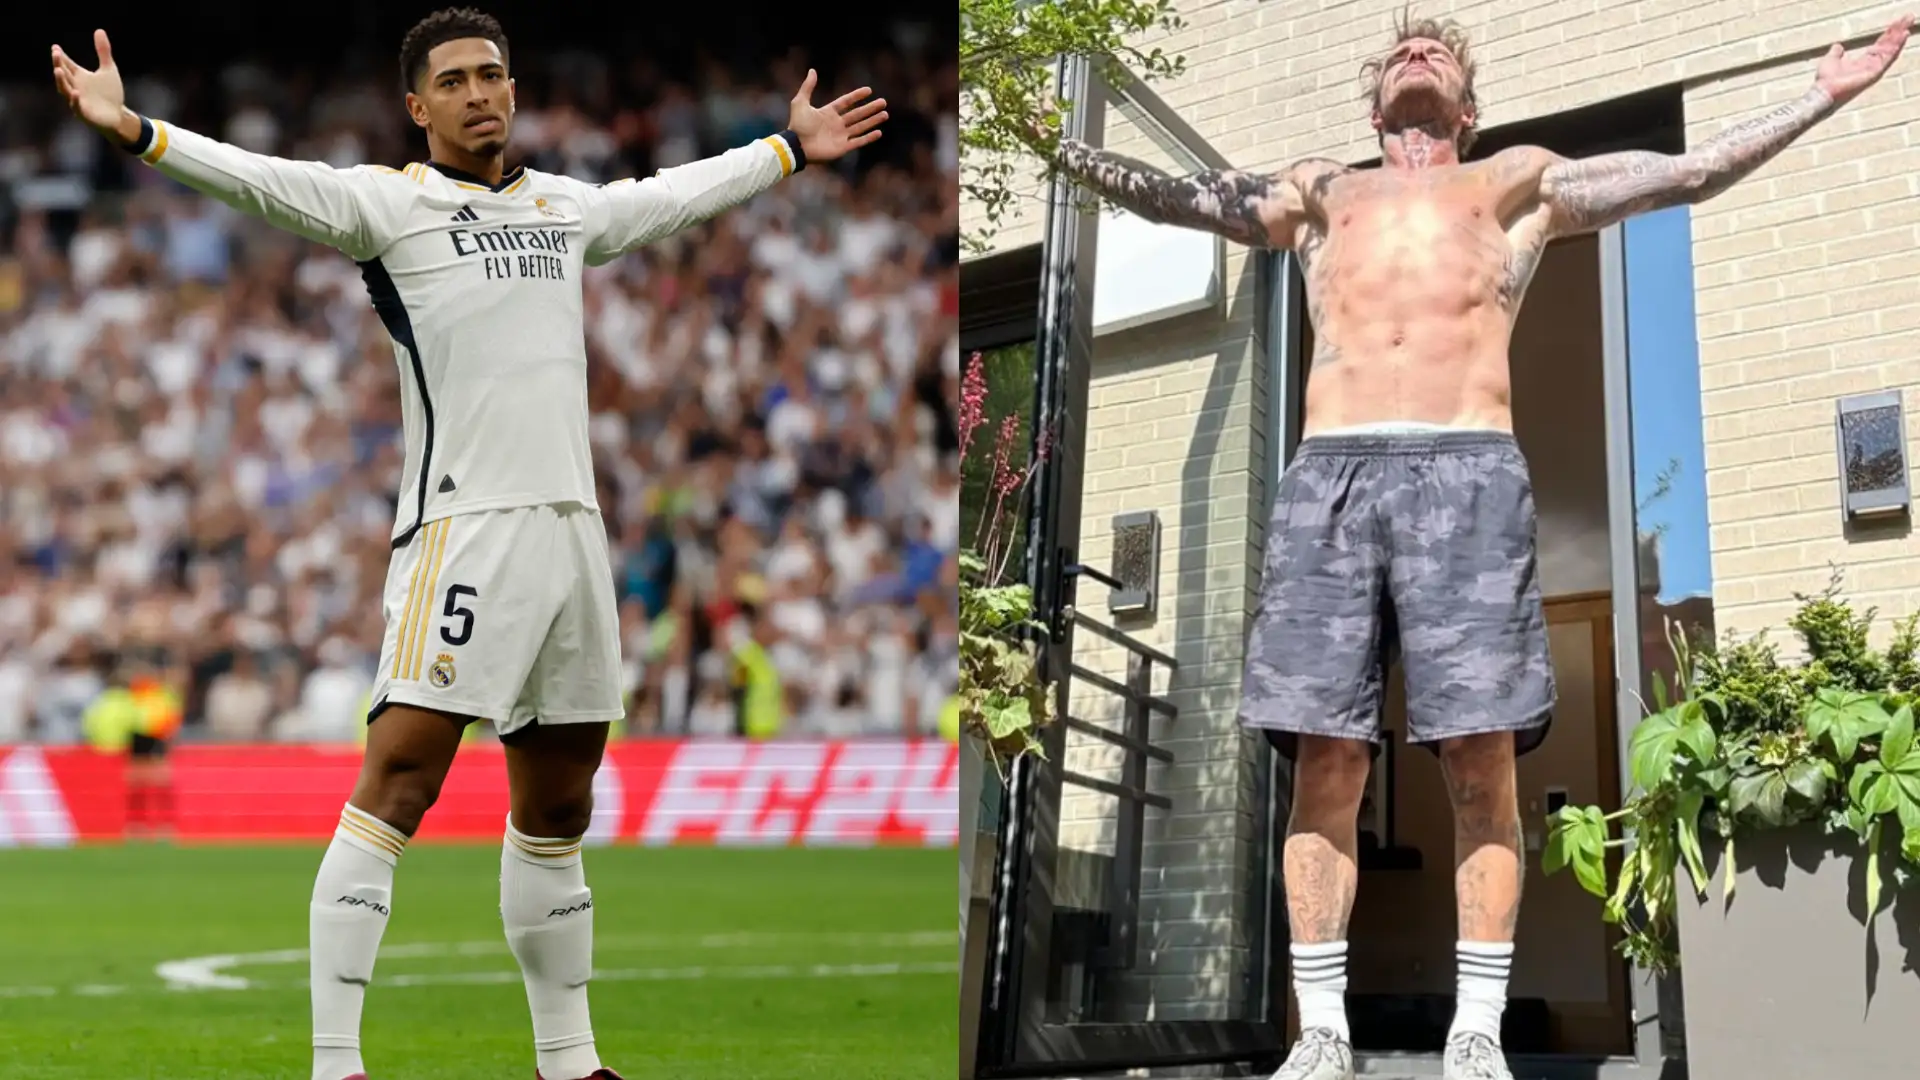 ‘Hey Jude!’ – Shirtless David Beckham pays Champions League tribute to Bellingham by copying Real Madrid star’s famous goal celebration